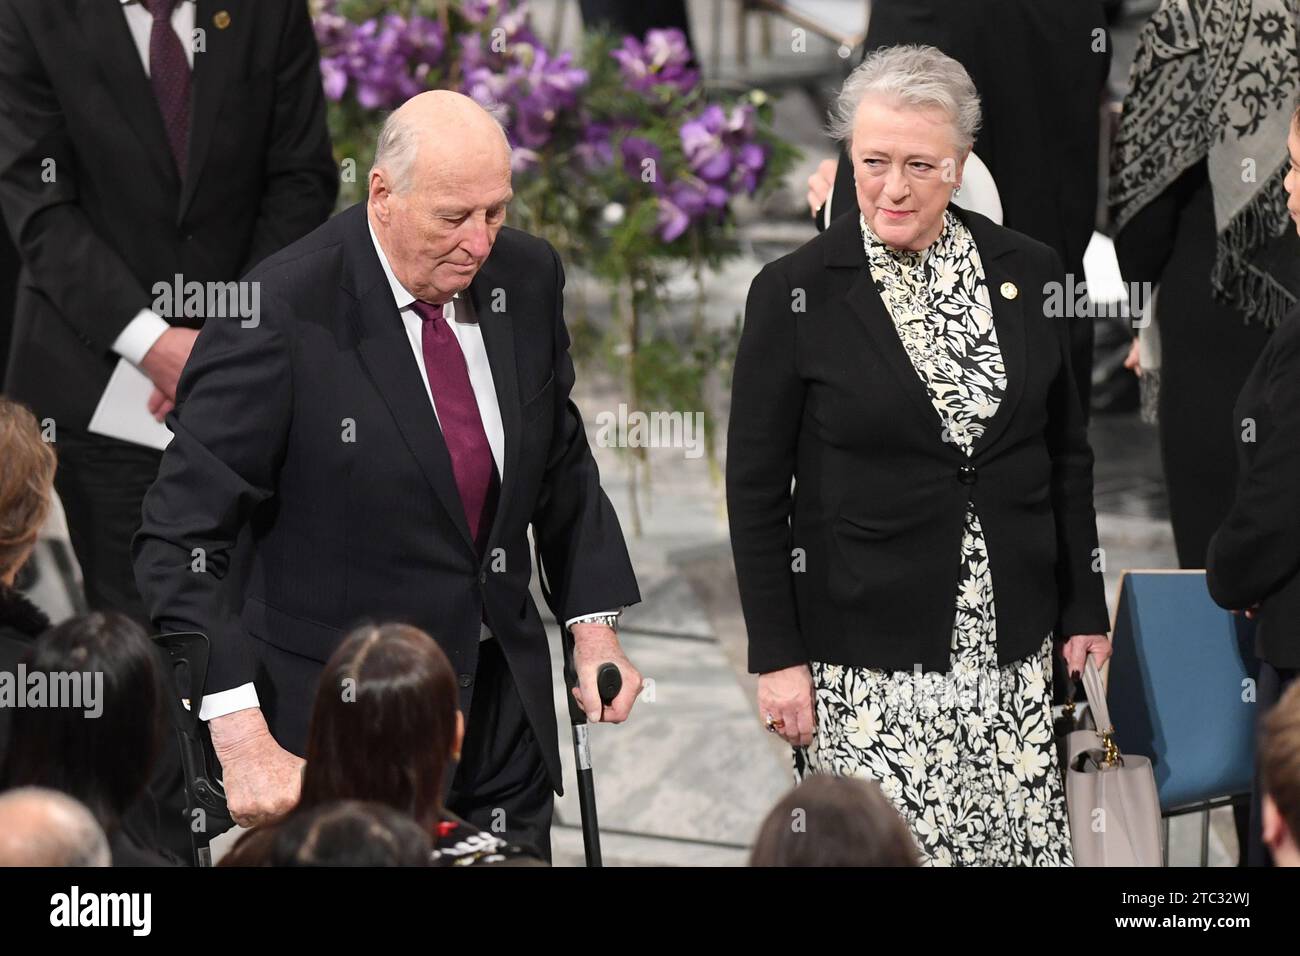 Oslo, Norway. 10th Dec, 2023. King Harald and chairman of the Nobel Committee Berit Reiss Andersen attend The Nobel Peace Prize ceremony for Iranian activist Narges Mohammadi at the Nobel Institute in Oslo, Norway. 2023 Nobel Peace Prize winner Narges Mohammadi is imprisoned and is therefore represented by her family. Mohammadi receives the peace prize for her fight against the oppression of women in Iran and the fight for human rights and freedom for all. December 10, 2023. Photo by Paul Treadway/ Credit: UPI/Alamy Live News Stock Photo